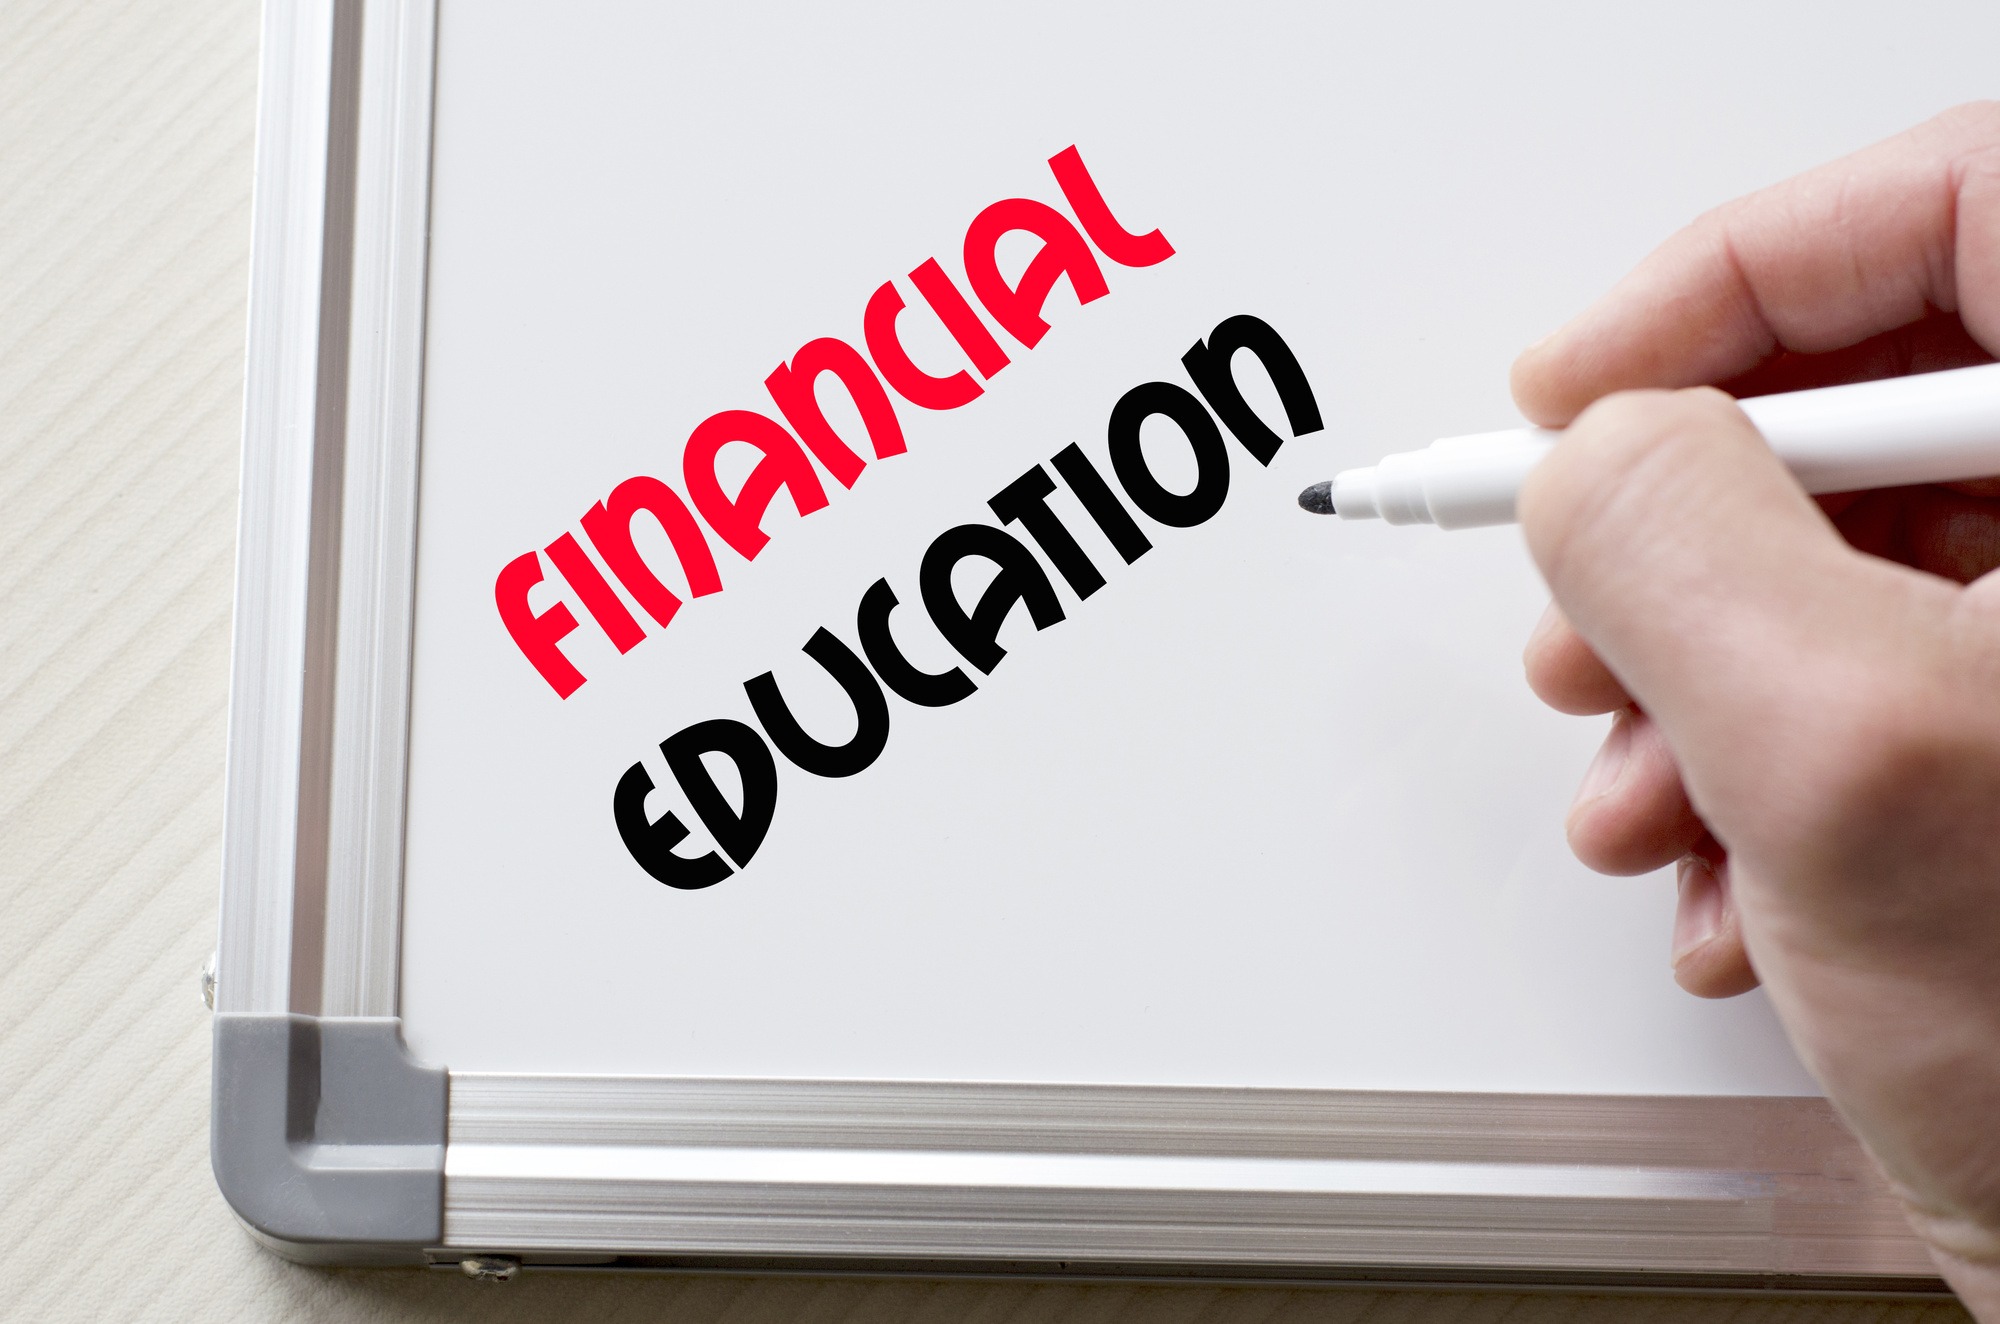 Financial Education – The best gift you can give your children